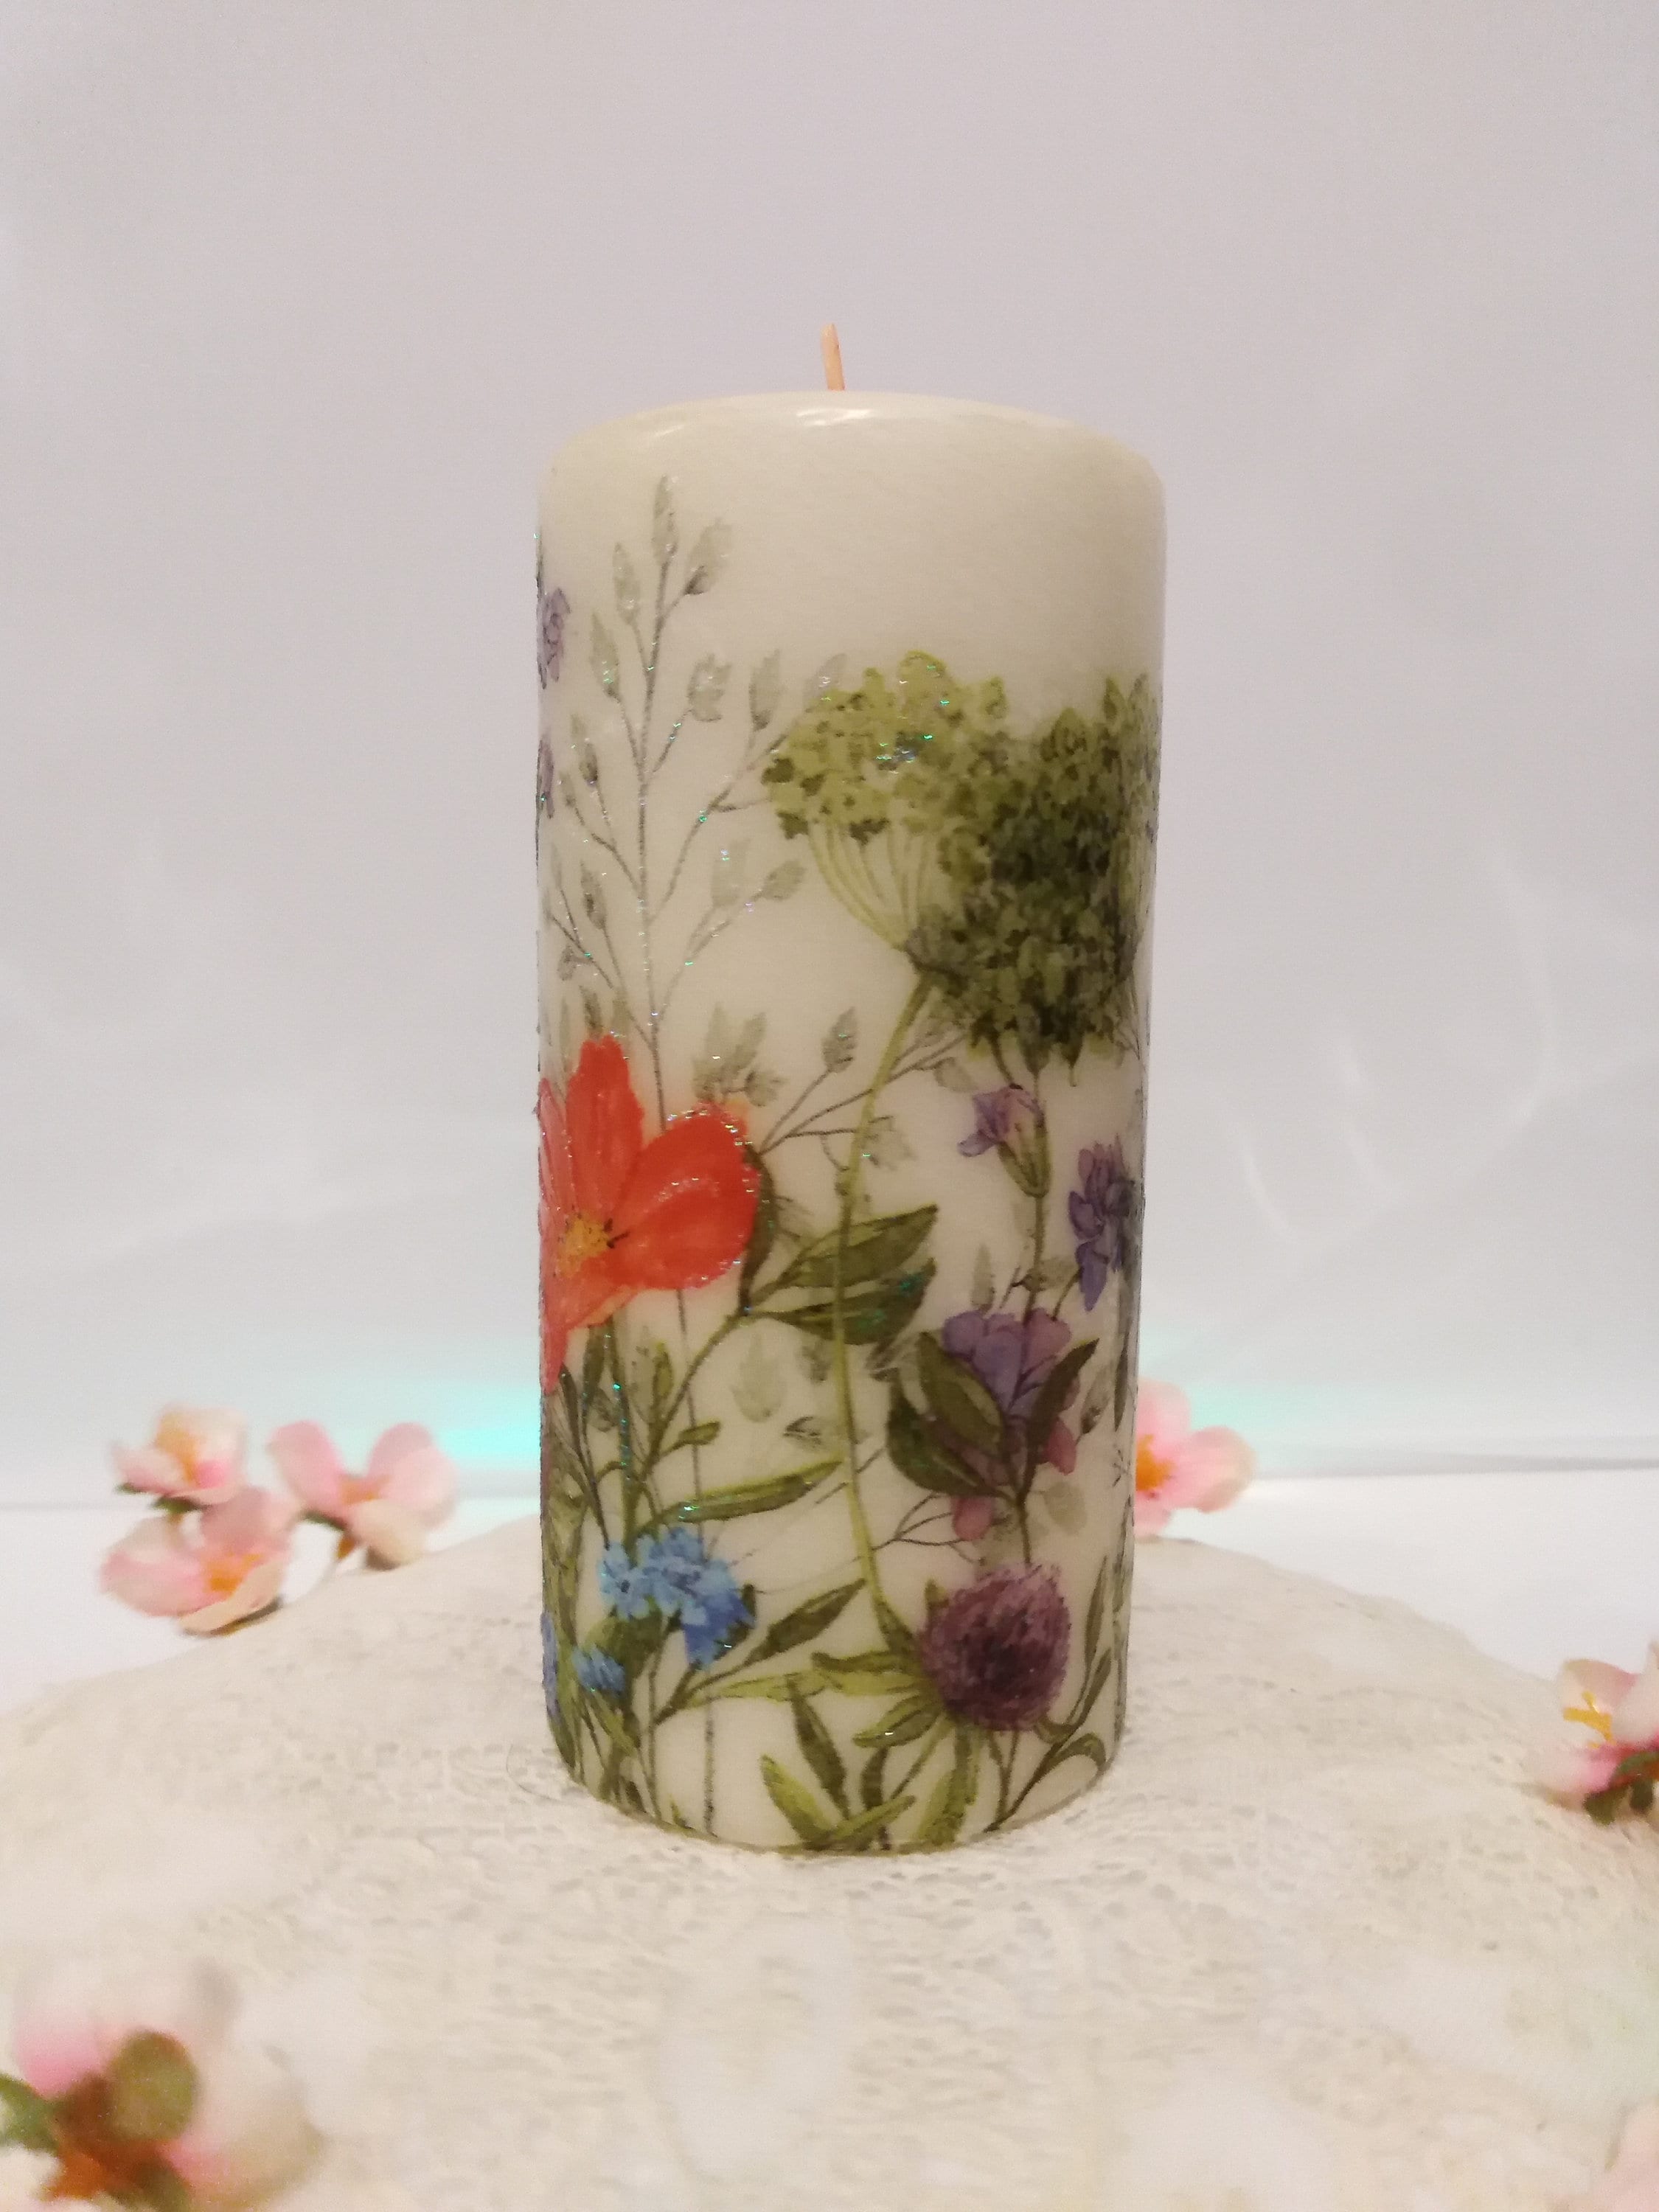 Decoupage A Candle With Dried Flowers - WooHome